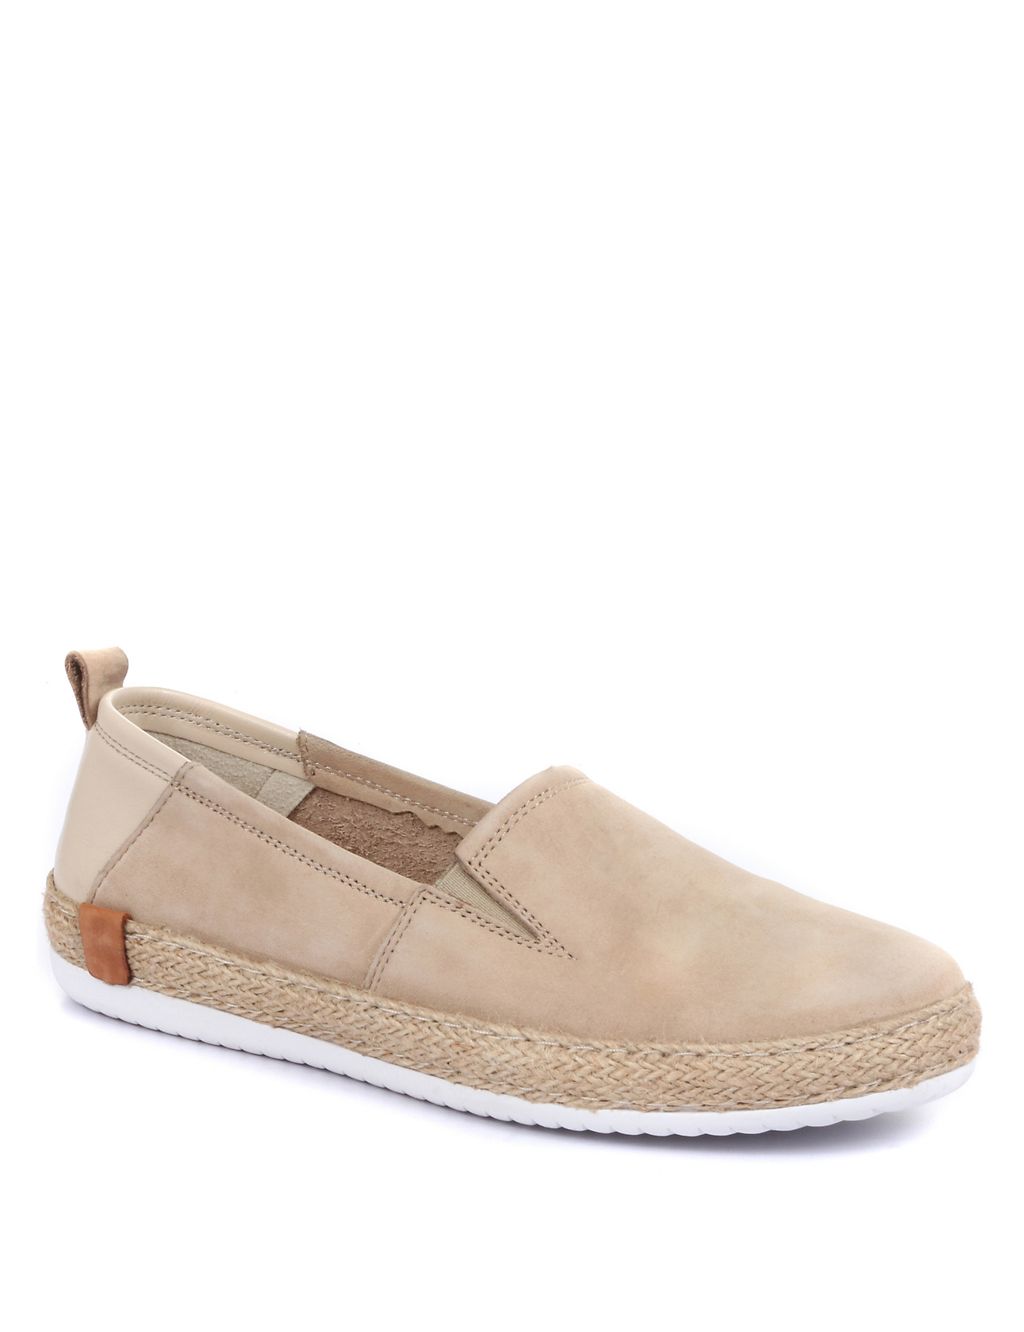 Leather Suede Flat Espadrilles 1 of 5